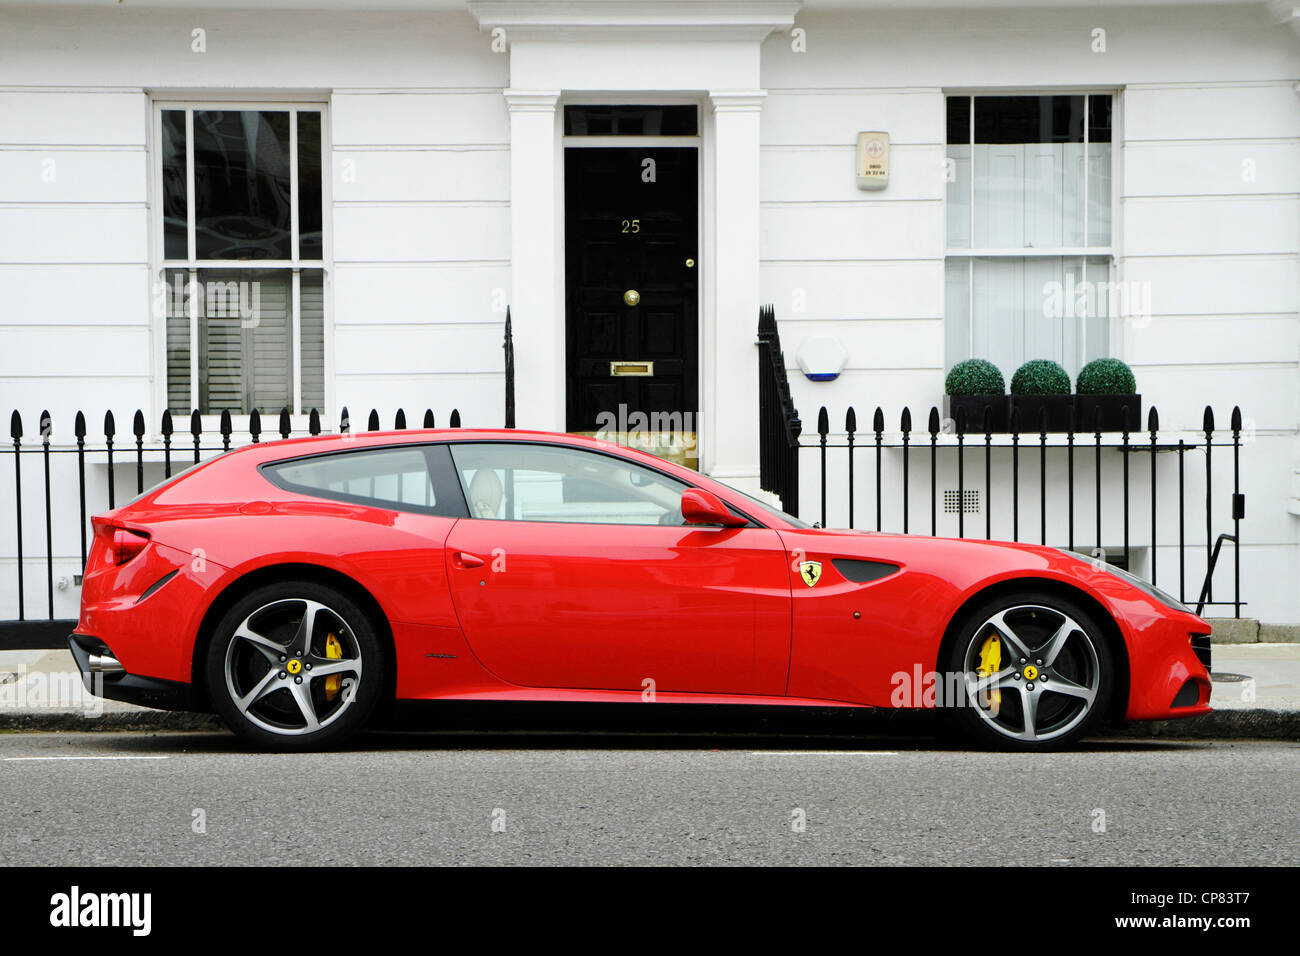 Red Ferrari FF sports car parked in affluent street, London borough of  Kensington and Chelsea, UK Stock Photo - Alamy